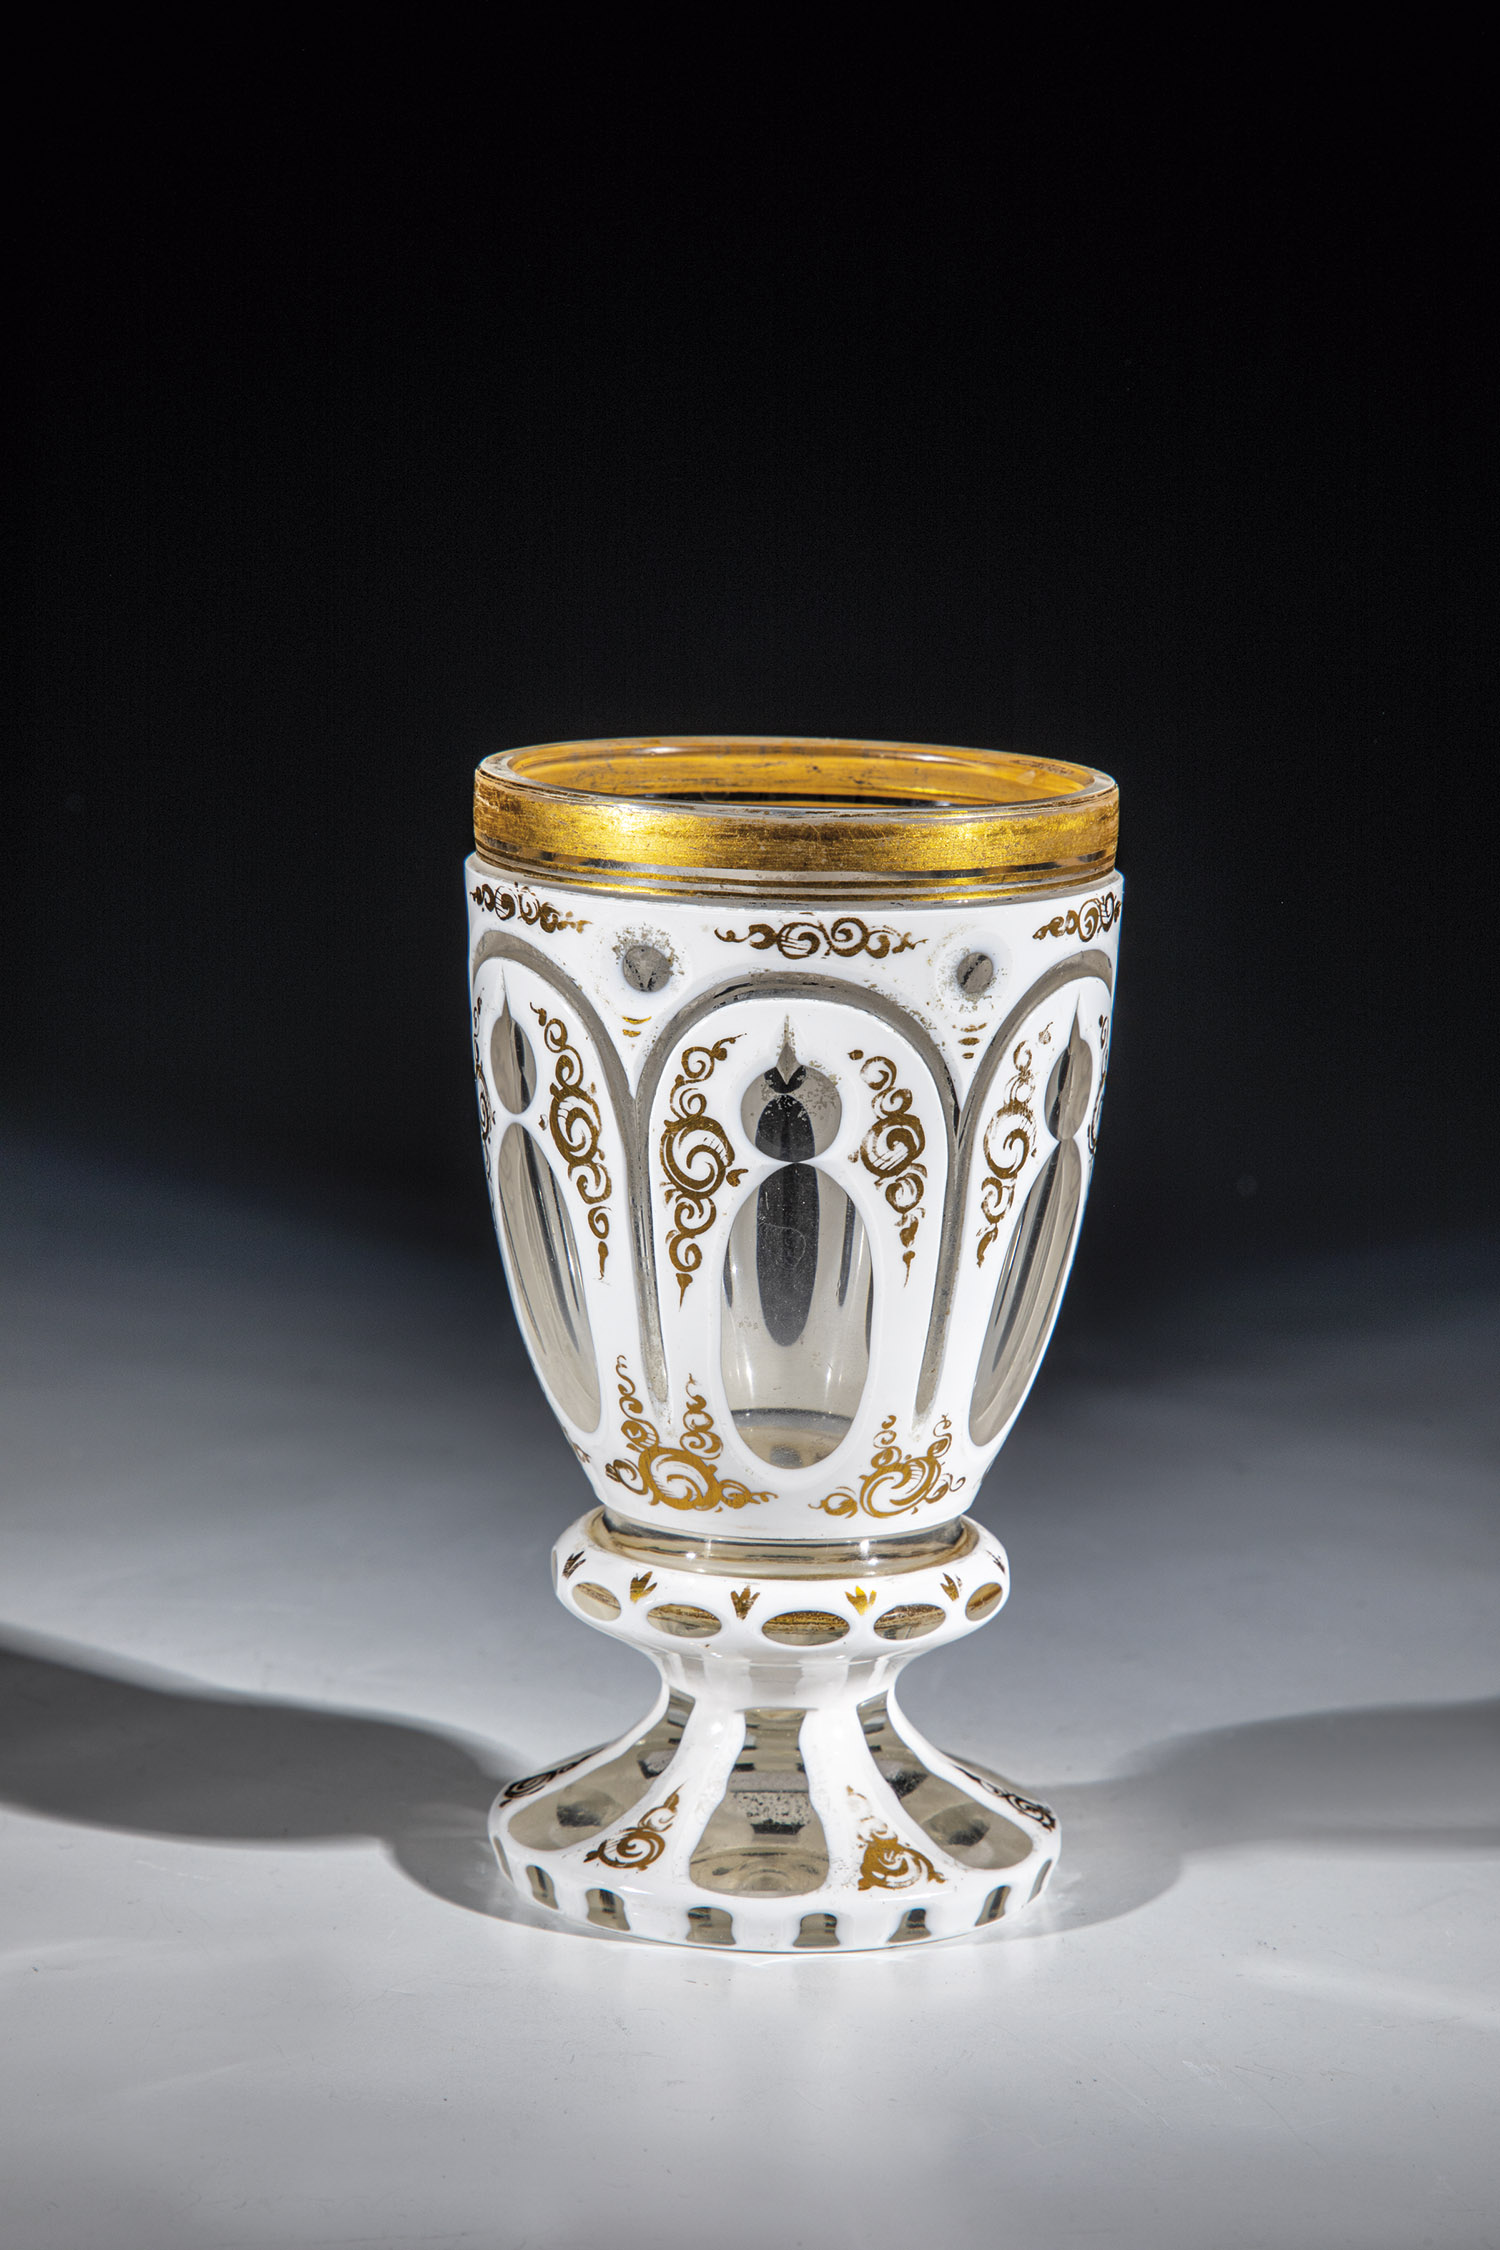 Footcup Bohemia, m. 19th century Colourless glass, with pewter enamel case, cut with Gothic